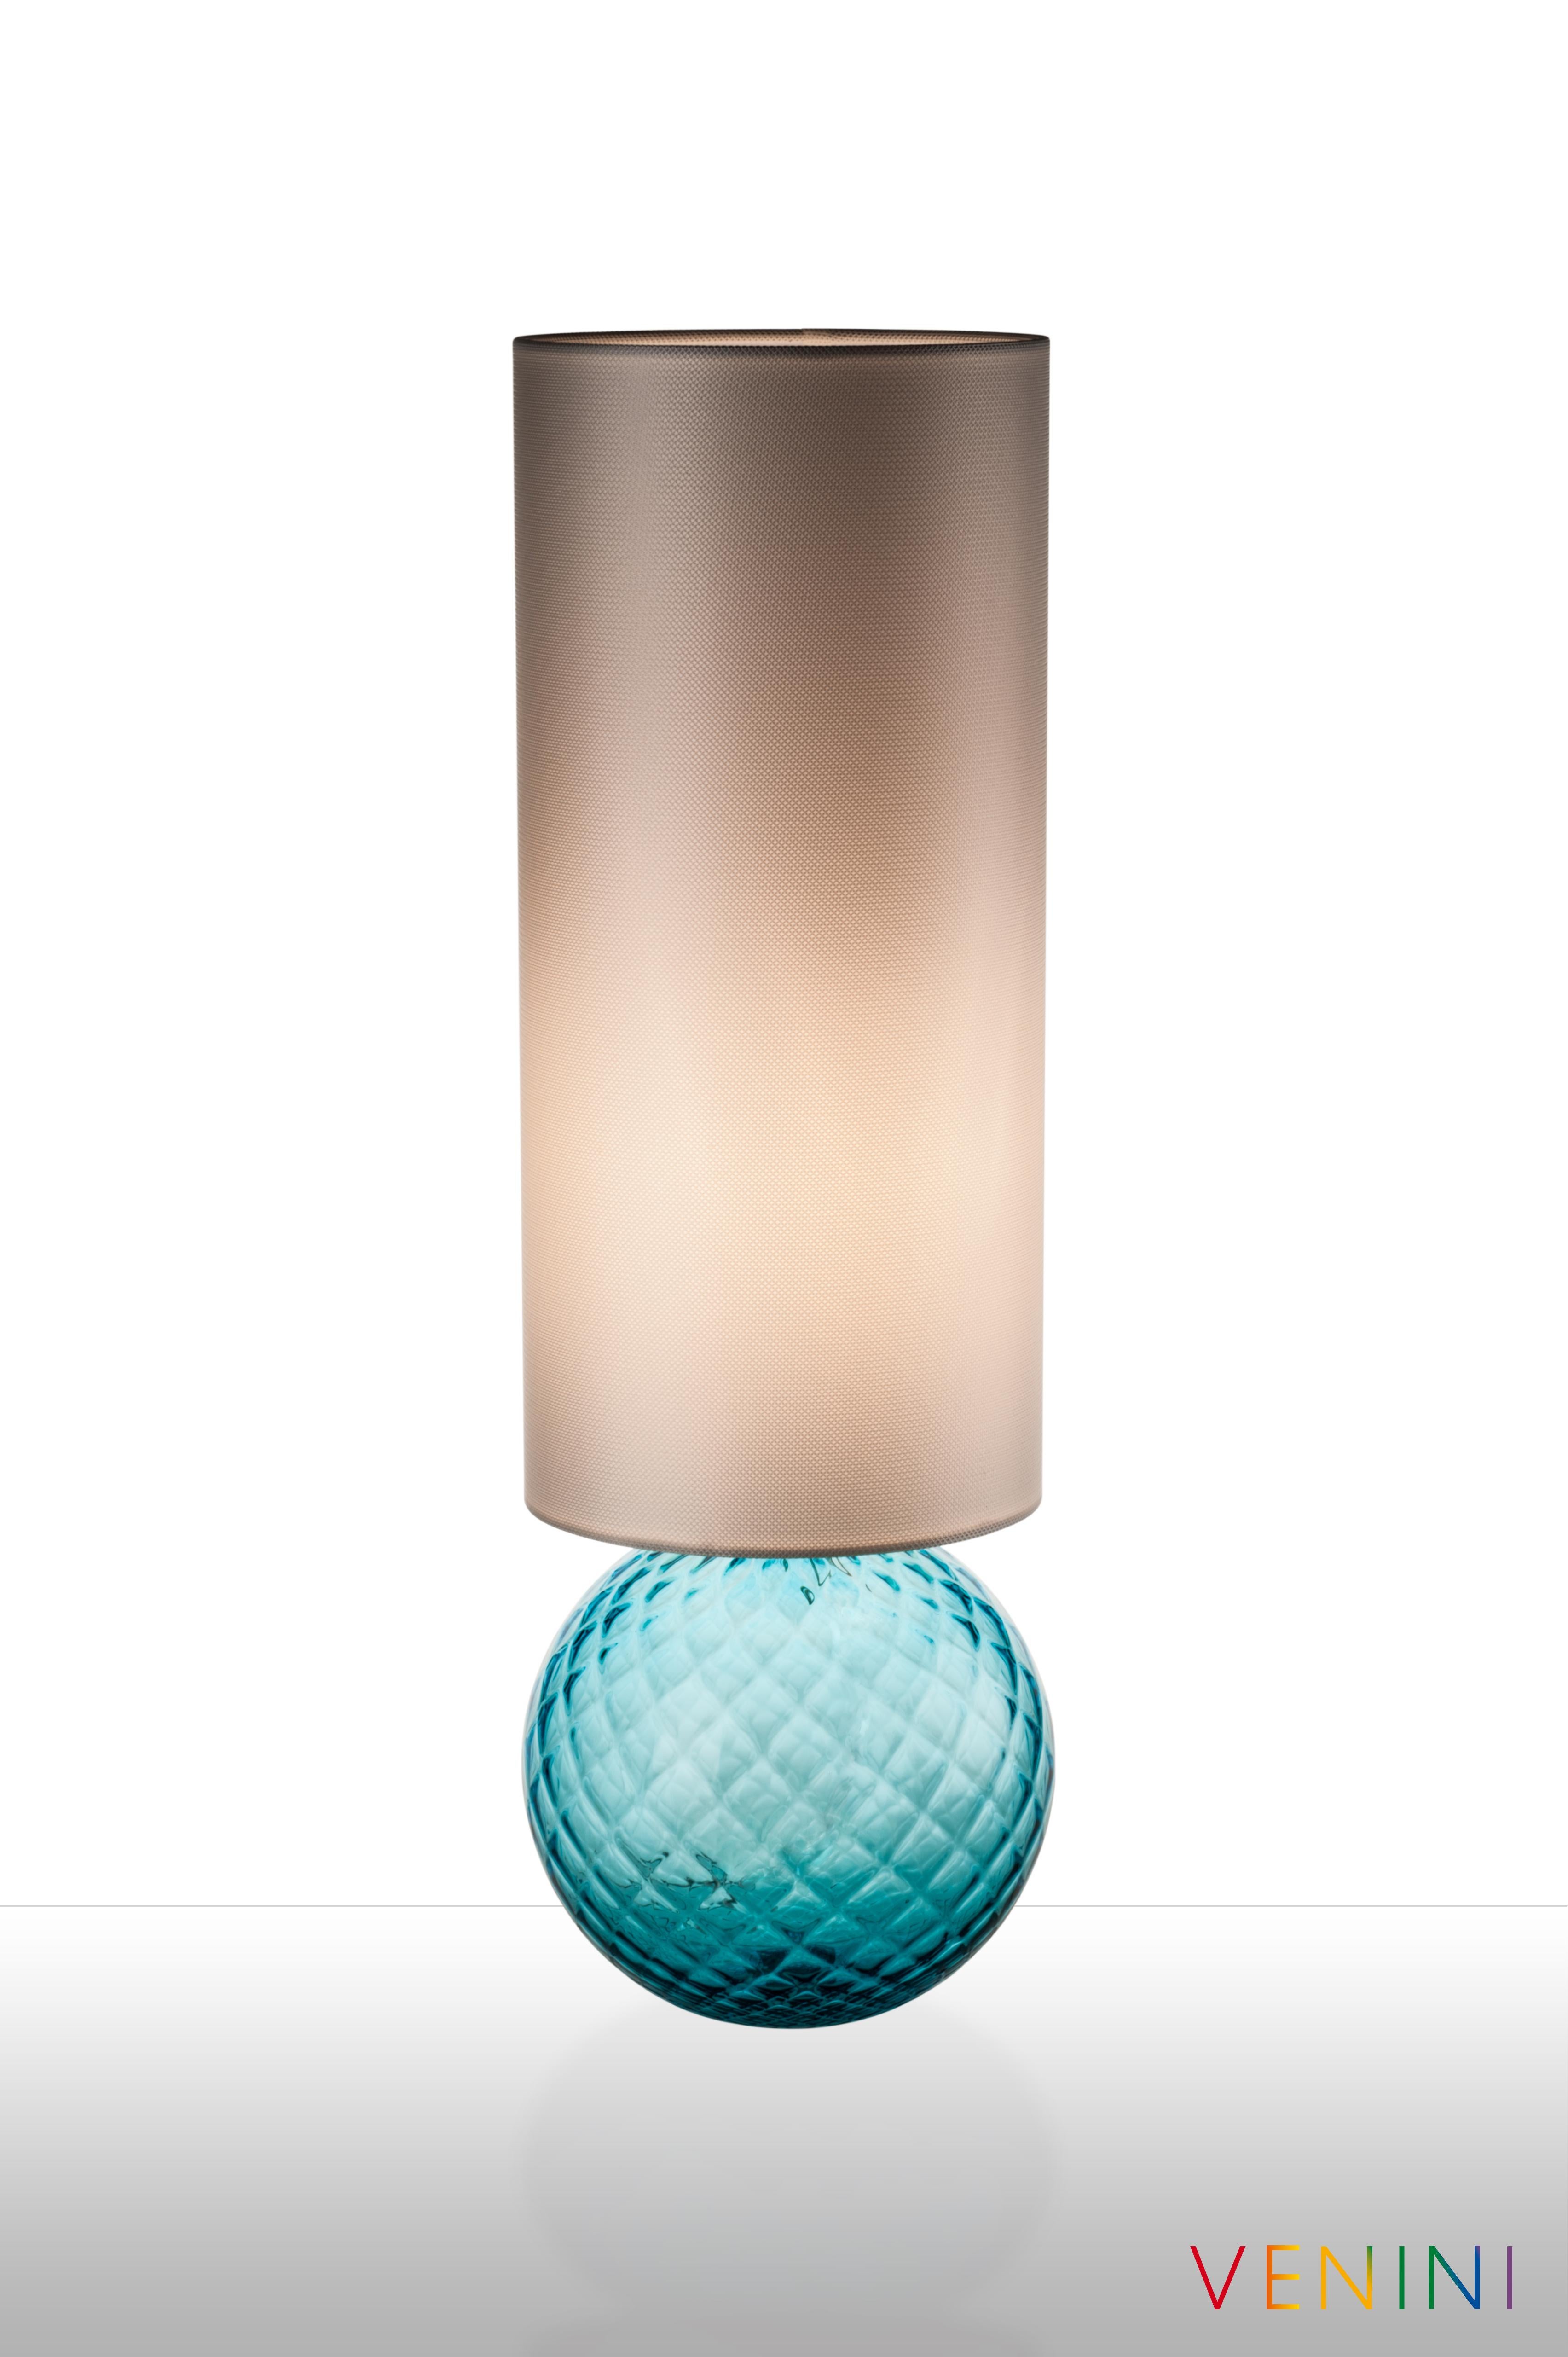 Balloton table lamp, designed and manufactured by Venini, is available in three different colors and features an handmade blown glass body with fabric shade. Indoor use only.

Dimensions: Ø 21.5 cm, H 66 cm.